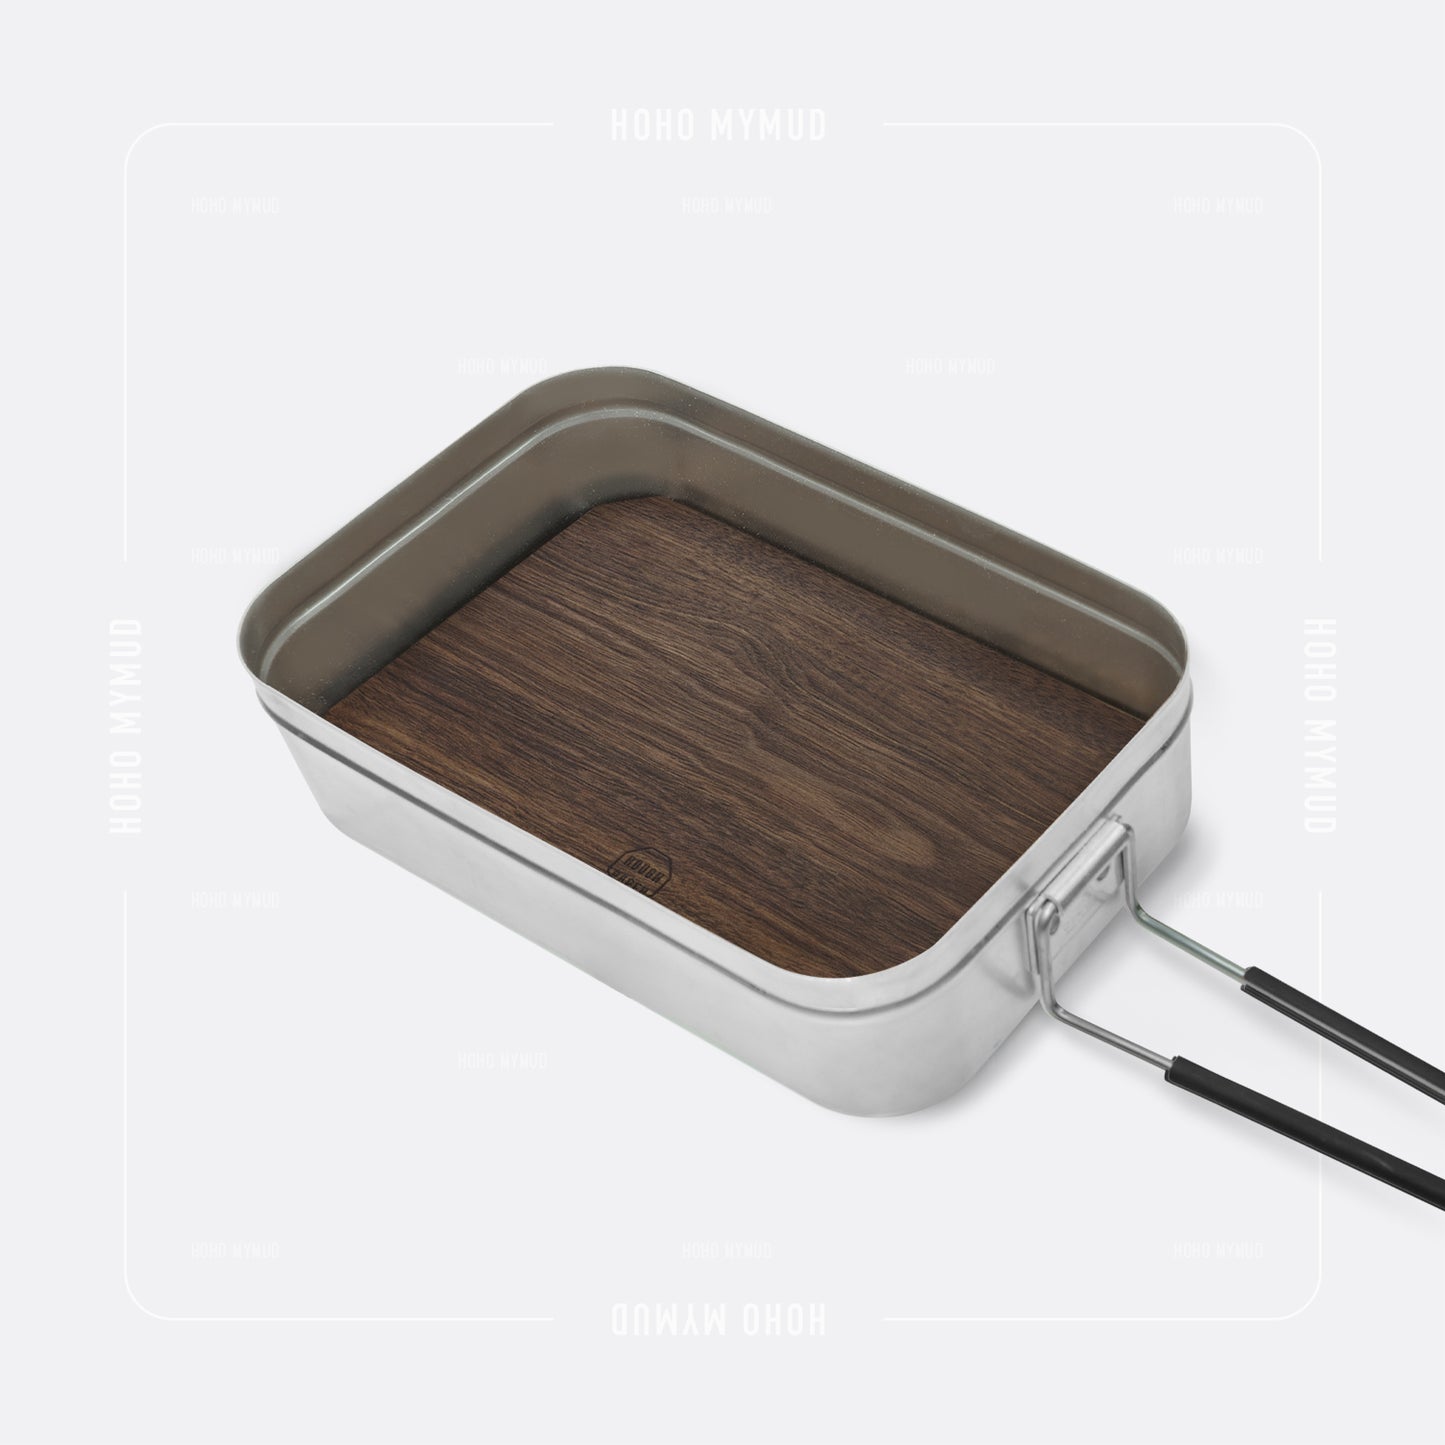 Rough Paper Wooden Cutting Board for Trangia Mess Tin 209 美國胡桃木製便攜砧板